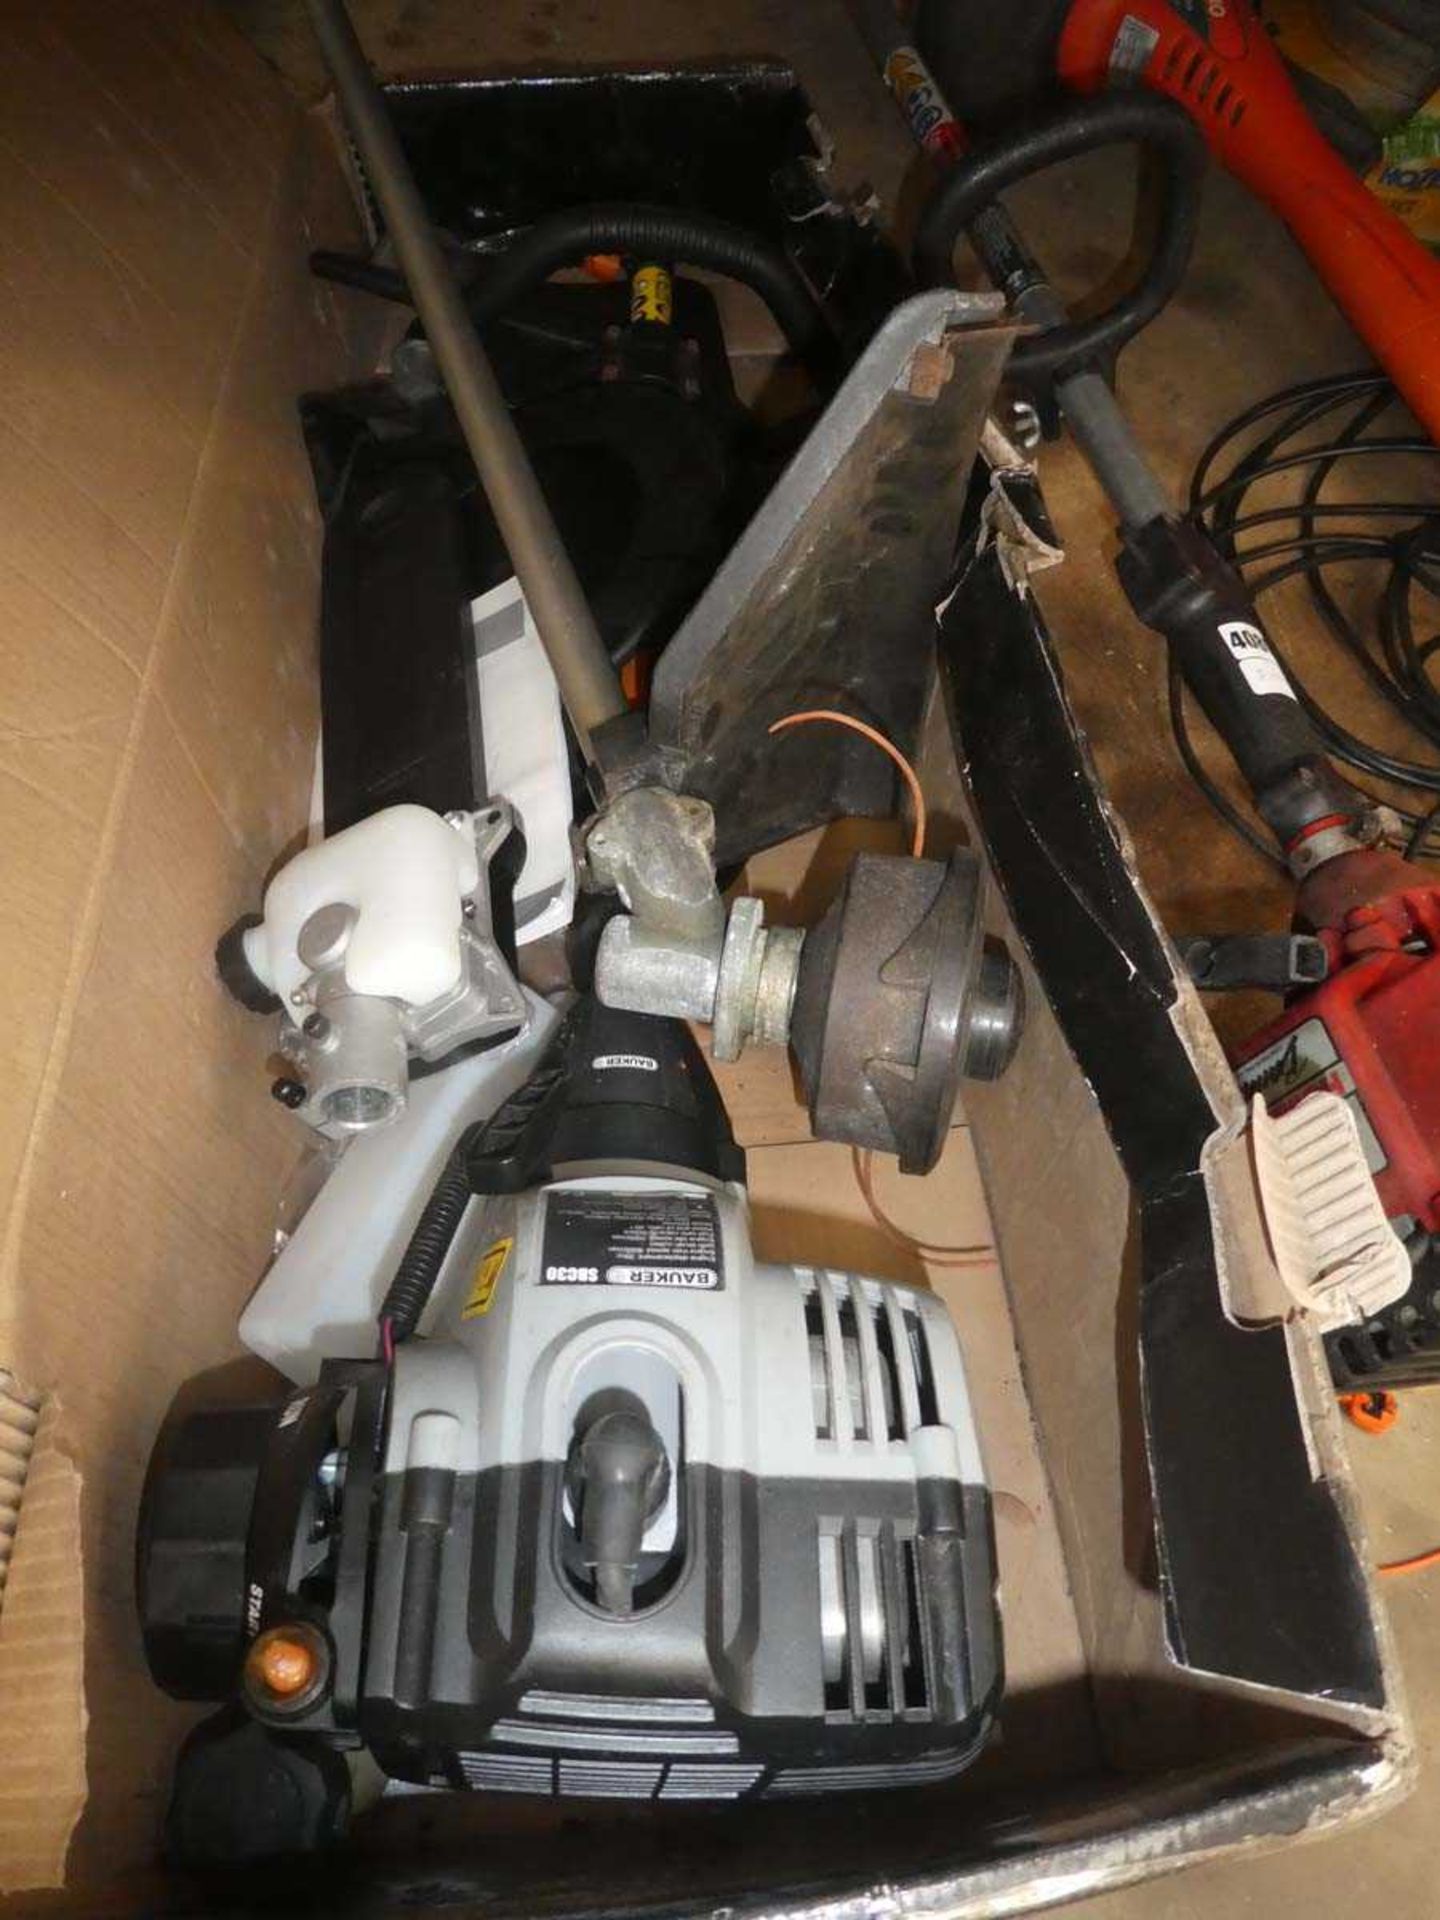 Bauker petrol powered multi tool in box with strimmer and chainsaw attachment